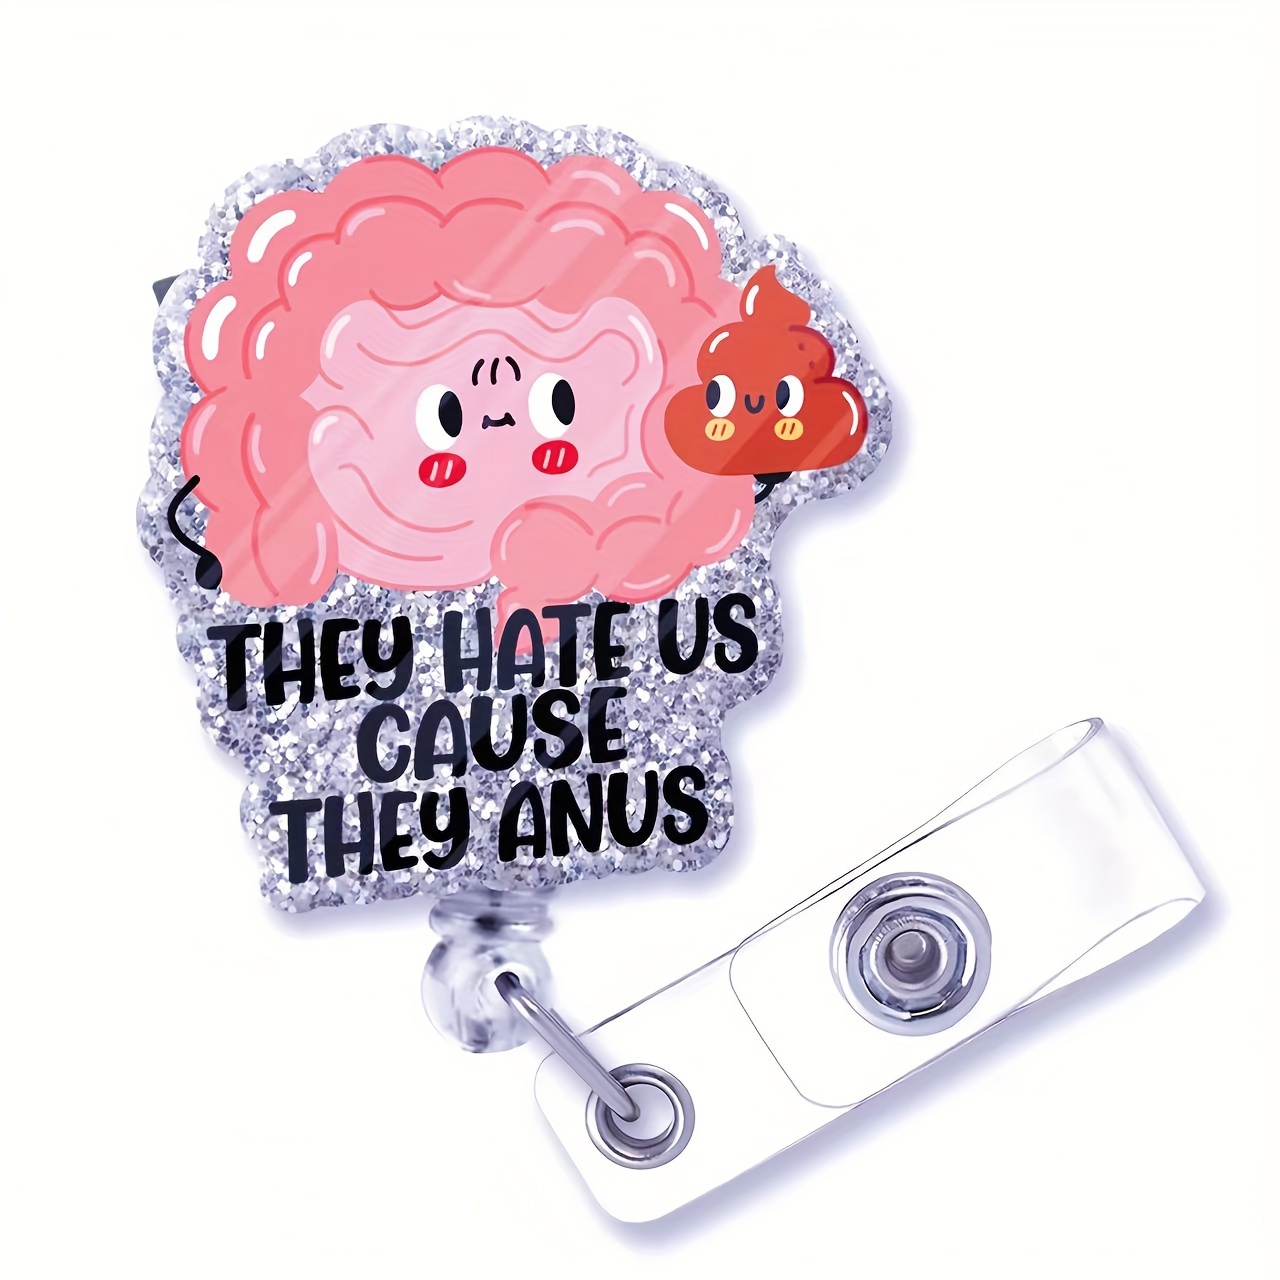 

Humorous 'they Hate Us Cause They Anus' Sparkling Badge Featuring A Clip - Ideal Present For Medical Professionals In The Field Of Digestive Health, Made From Sturdy Abs Material